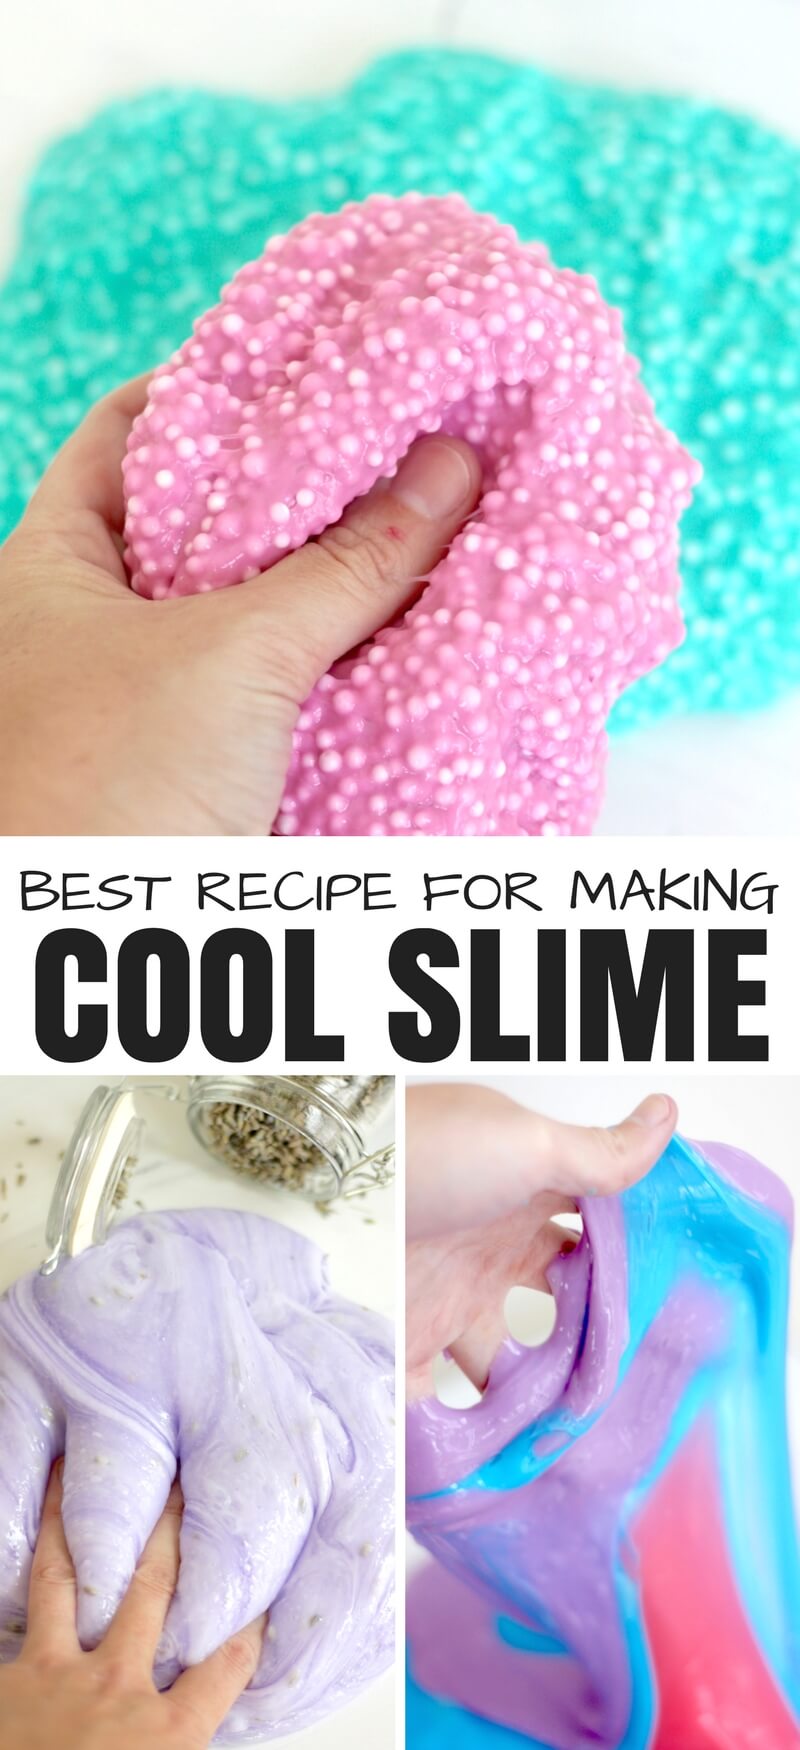 Our super simple slime recipe with borax is one of our most versatile slime recipes! Lately we have been testing some very cool slime themes with it, and I am so excited to share with you how awesome the borax slime recipe really is! The key to this slime is in the ratio of borax powder to water. Homemade slime is always a delight for kids to make.